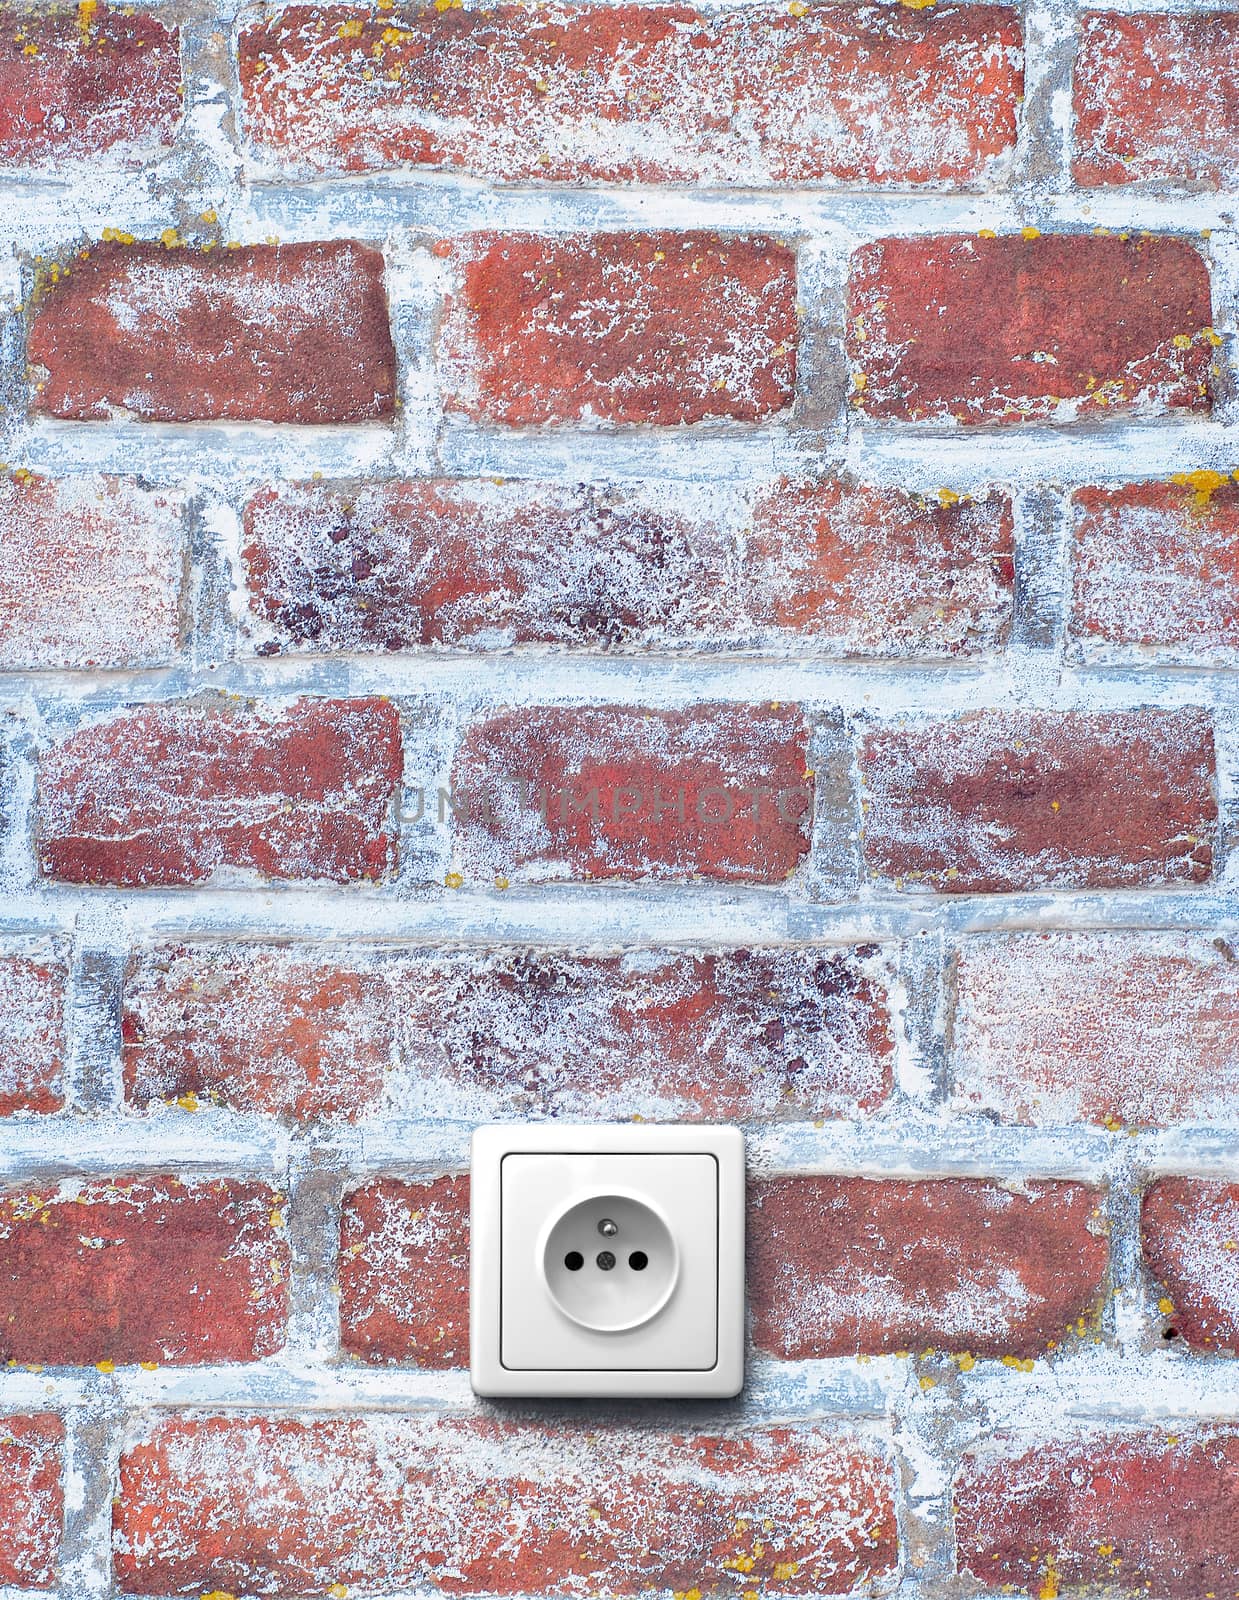 Old brick wall with socket by studio023